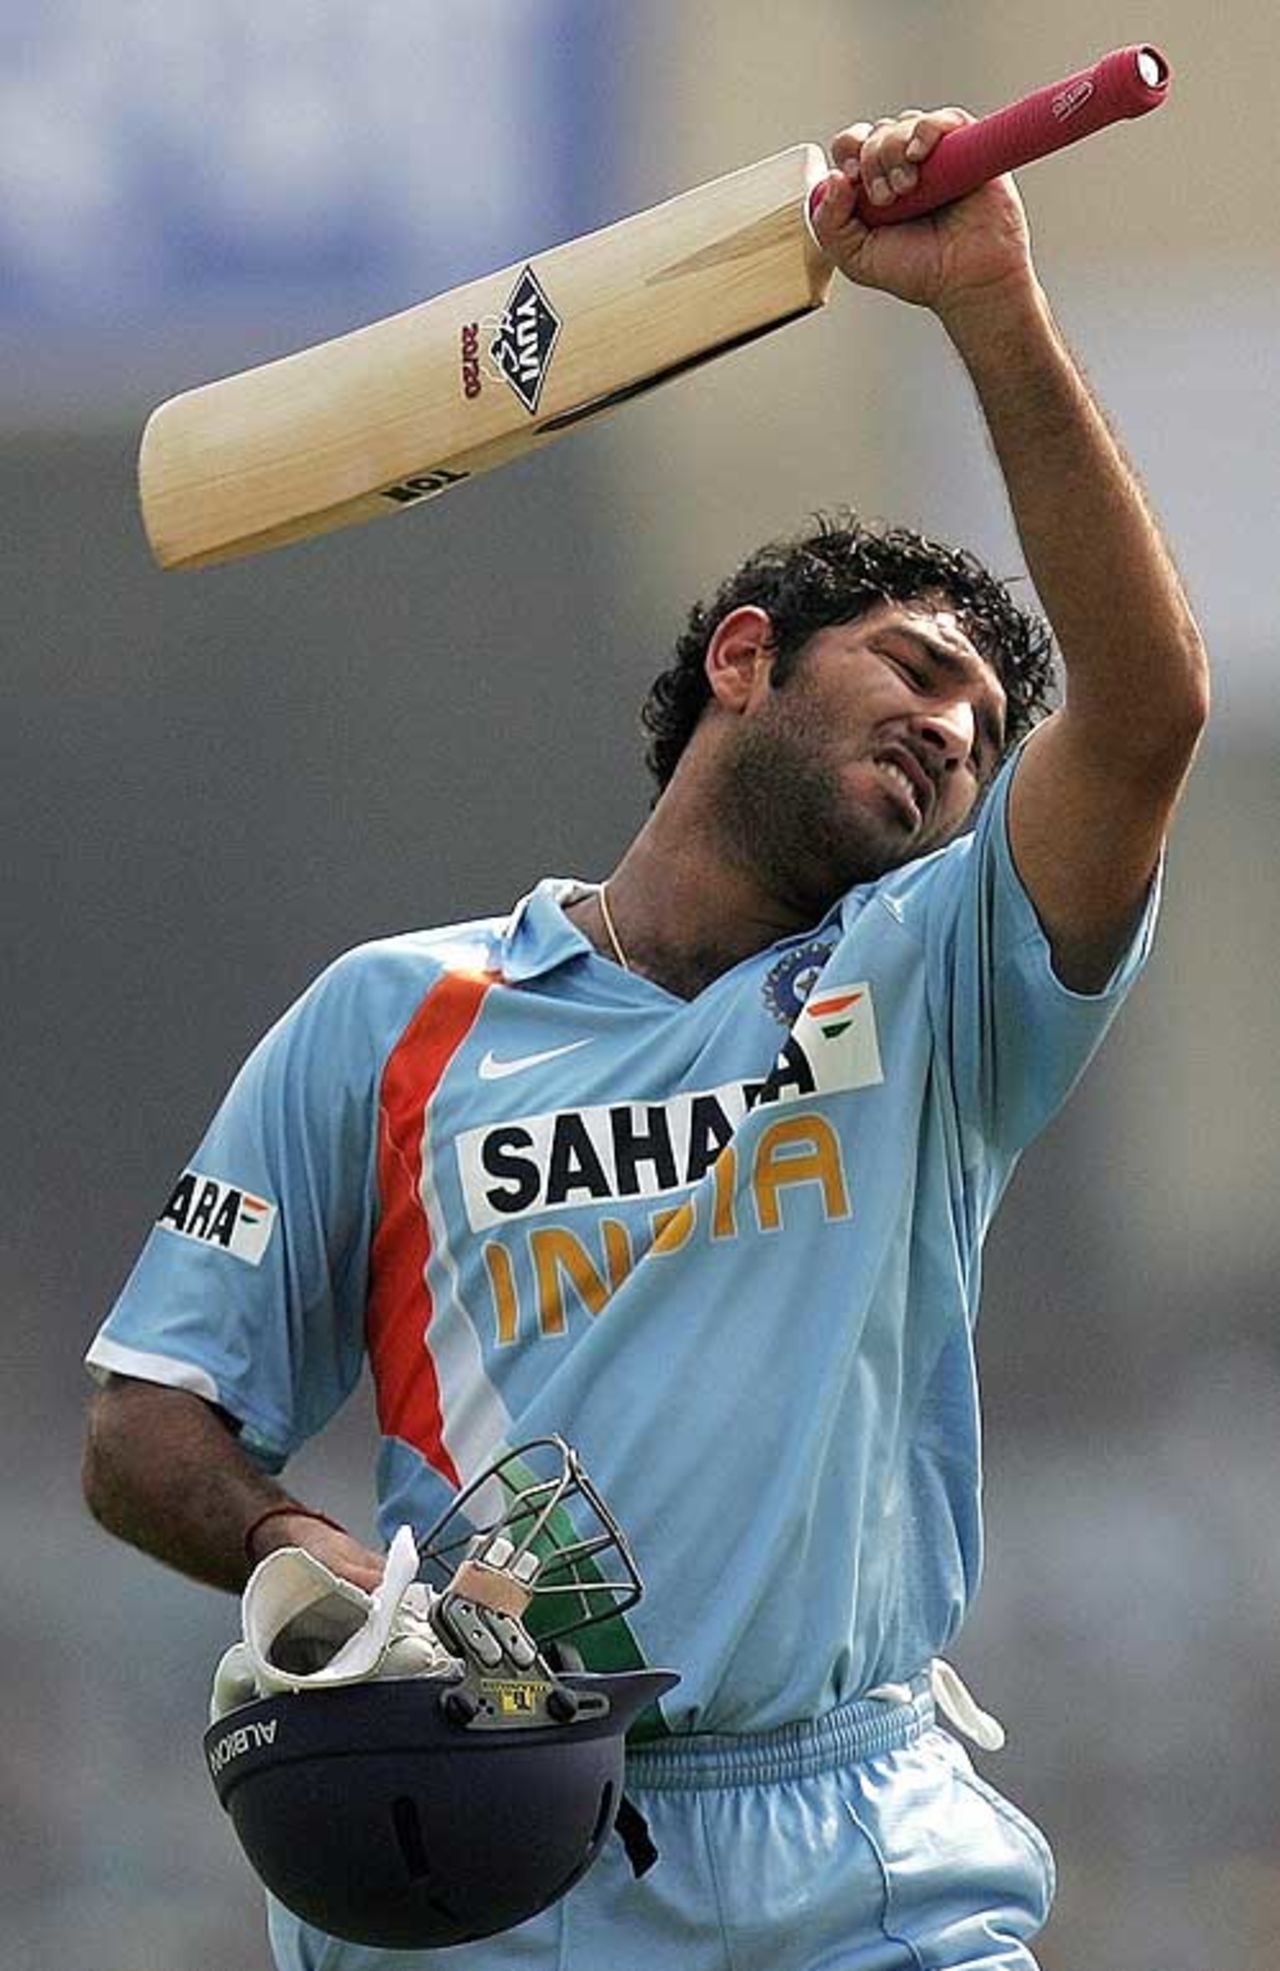 Yuvraj Singh walks back after being caught in the deep, India v Pakistan, 3rd ODI, Kanpur, November 11, 2007